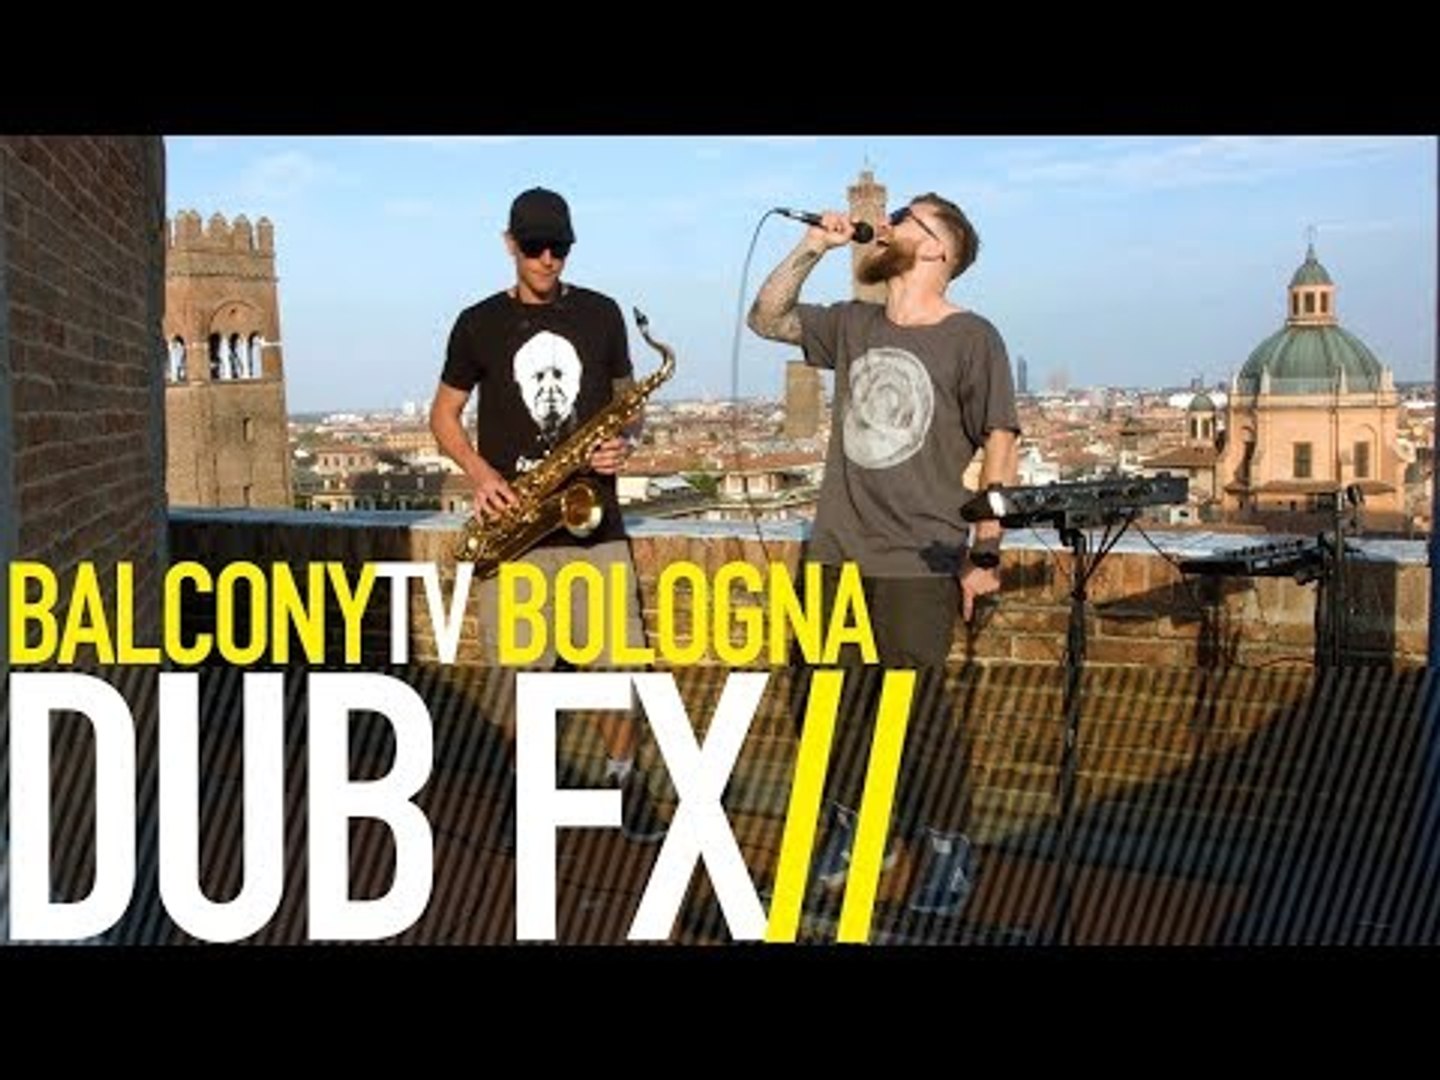 DUB FX - DON'T GIVE UP (BalconyTV) - video Dailymotion